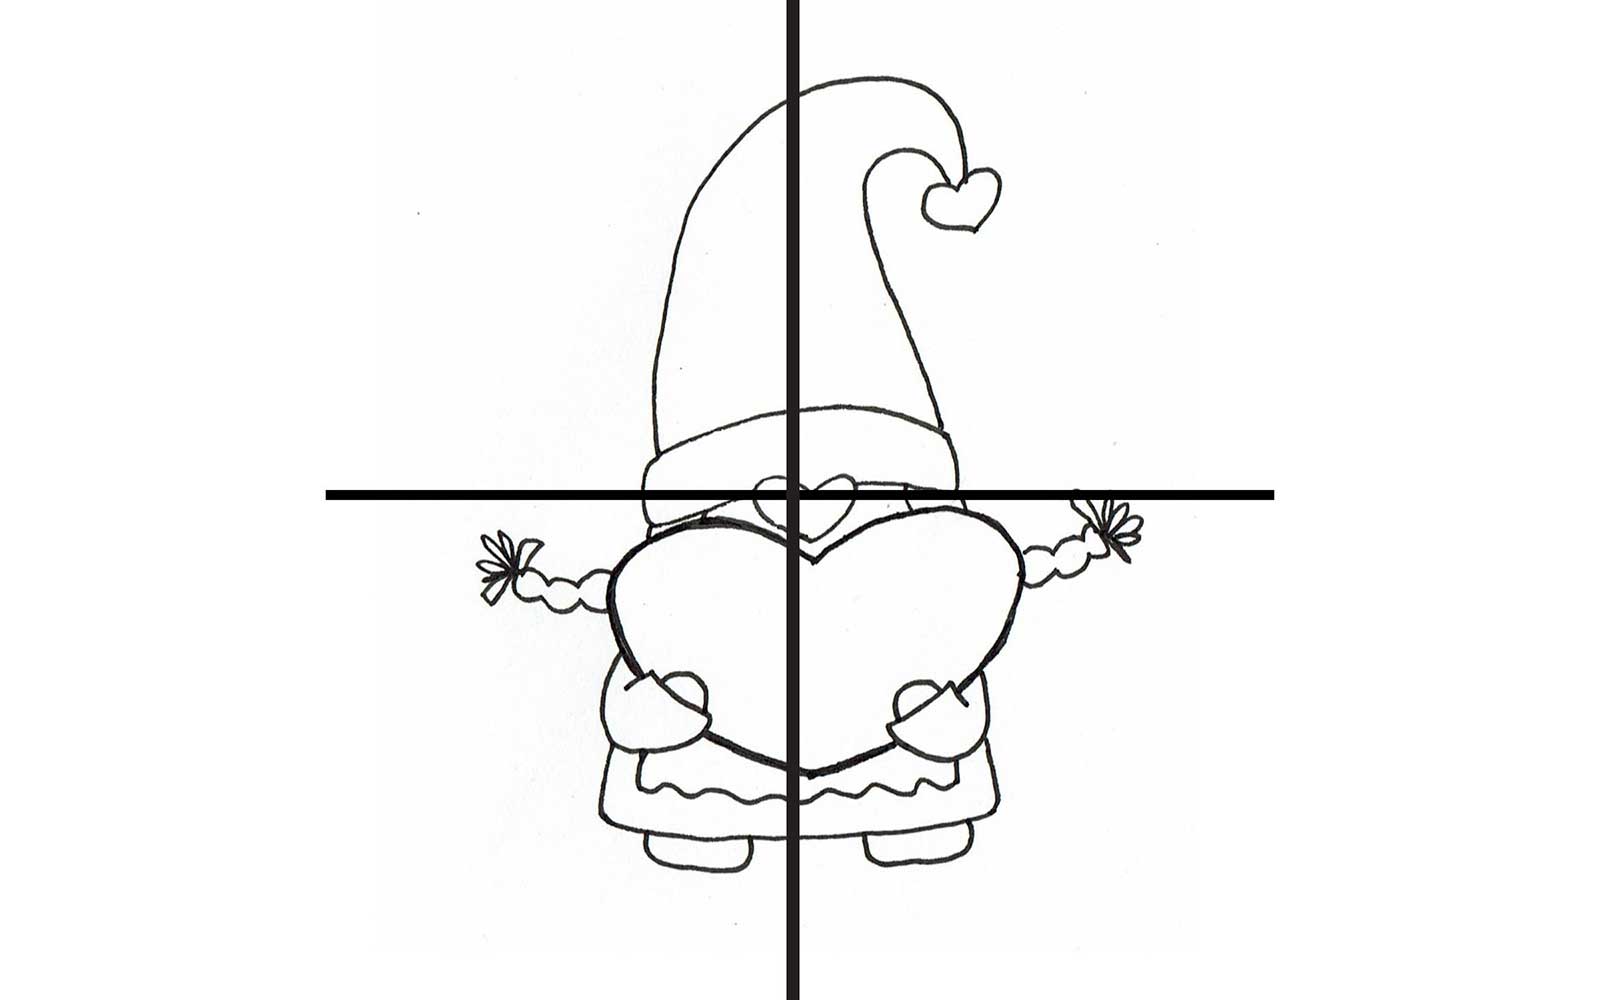 Honey gnome diagram with placement cross mark